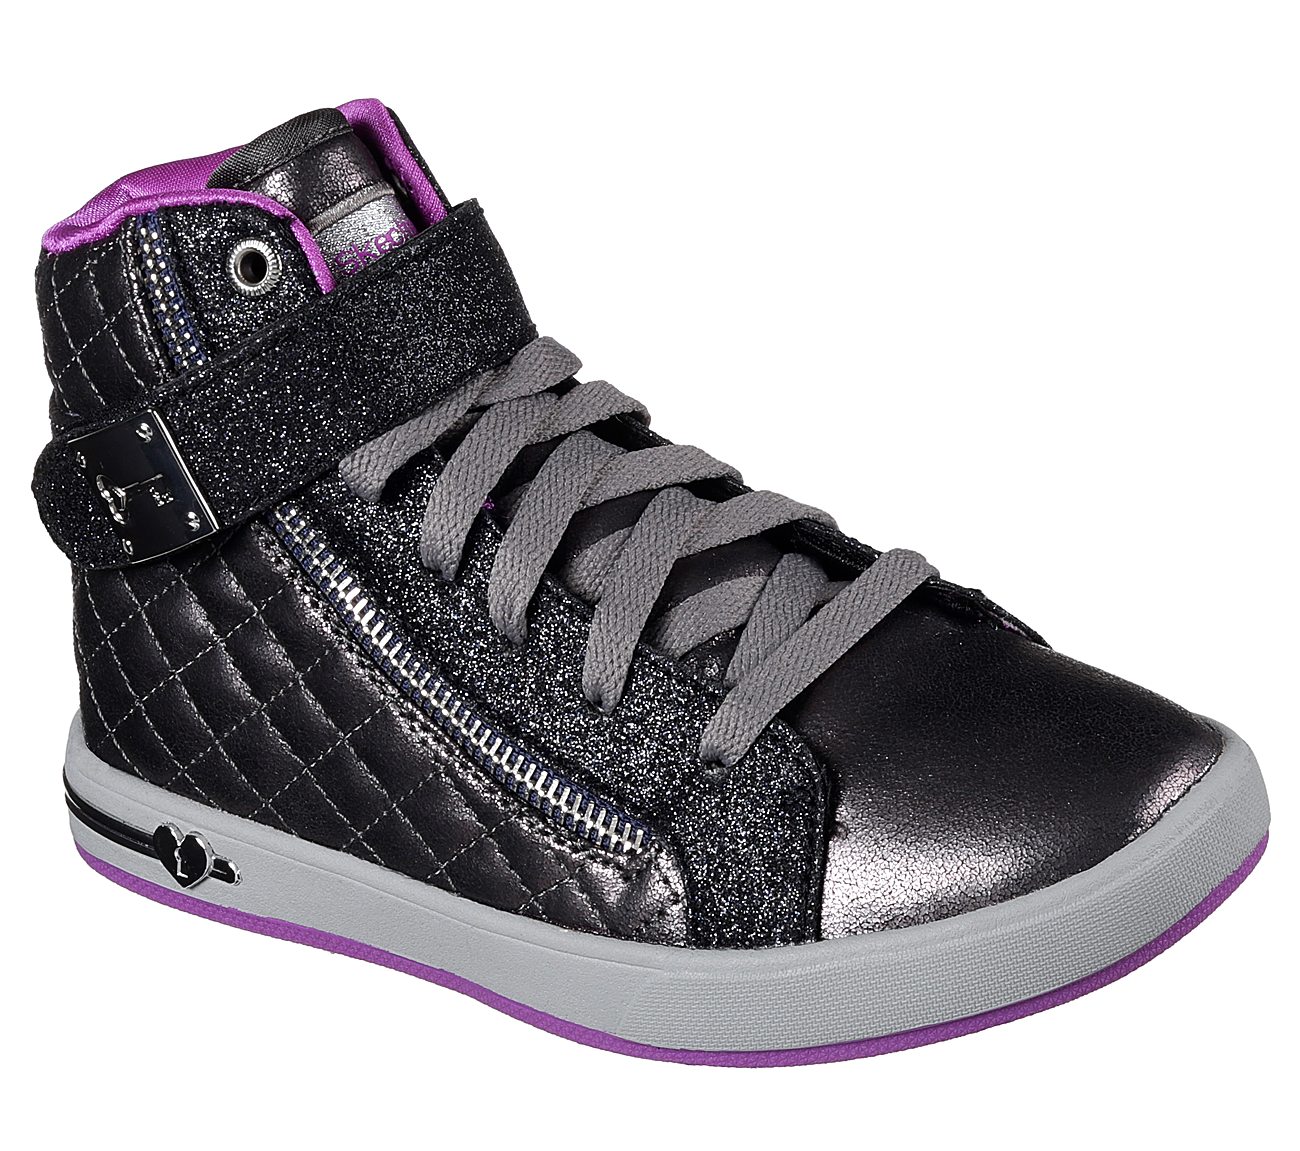 Buy Skechers Shoutouts Quilted Crush Comfort Shoes Shoes 